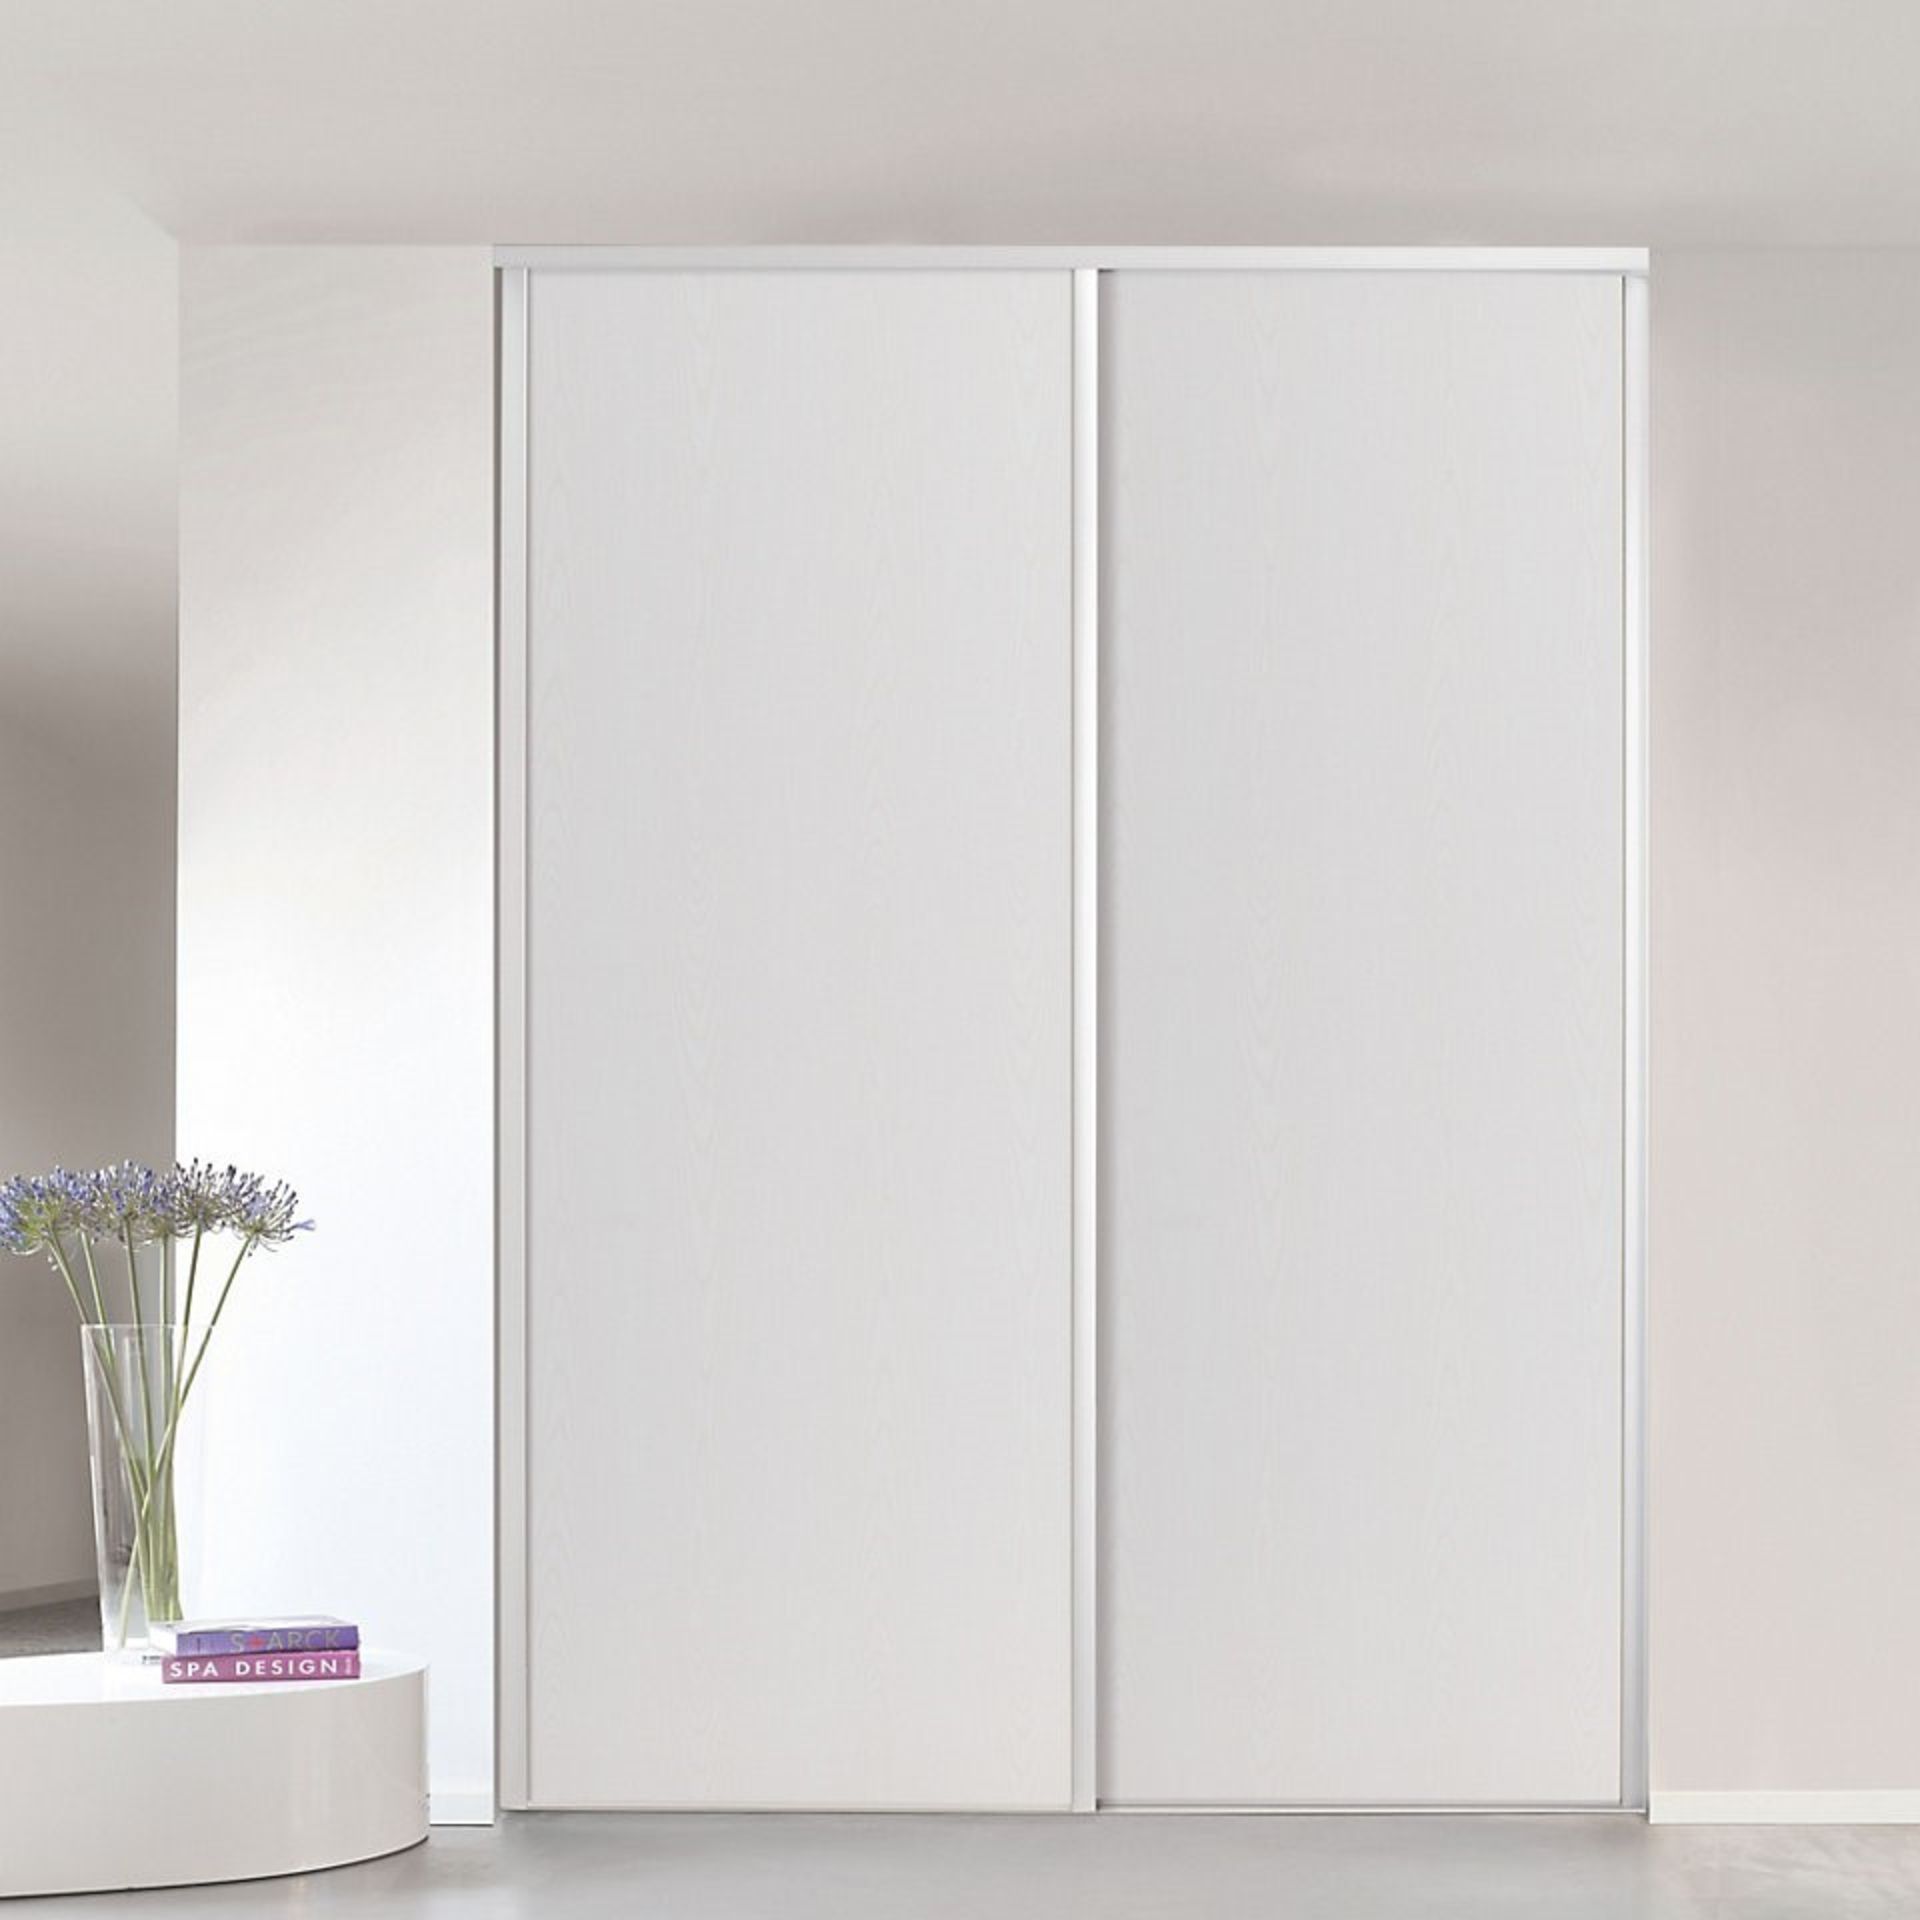 1 x VALLA 1 Sliding Wardrobe Door In White Decorative Panel With White Lacquered Steel Profiles - CL - Image 2 of 4